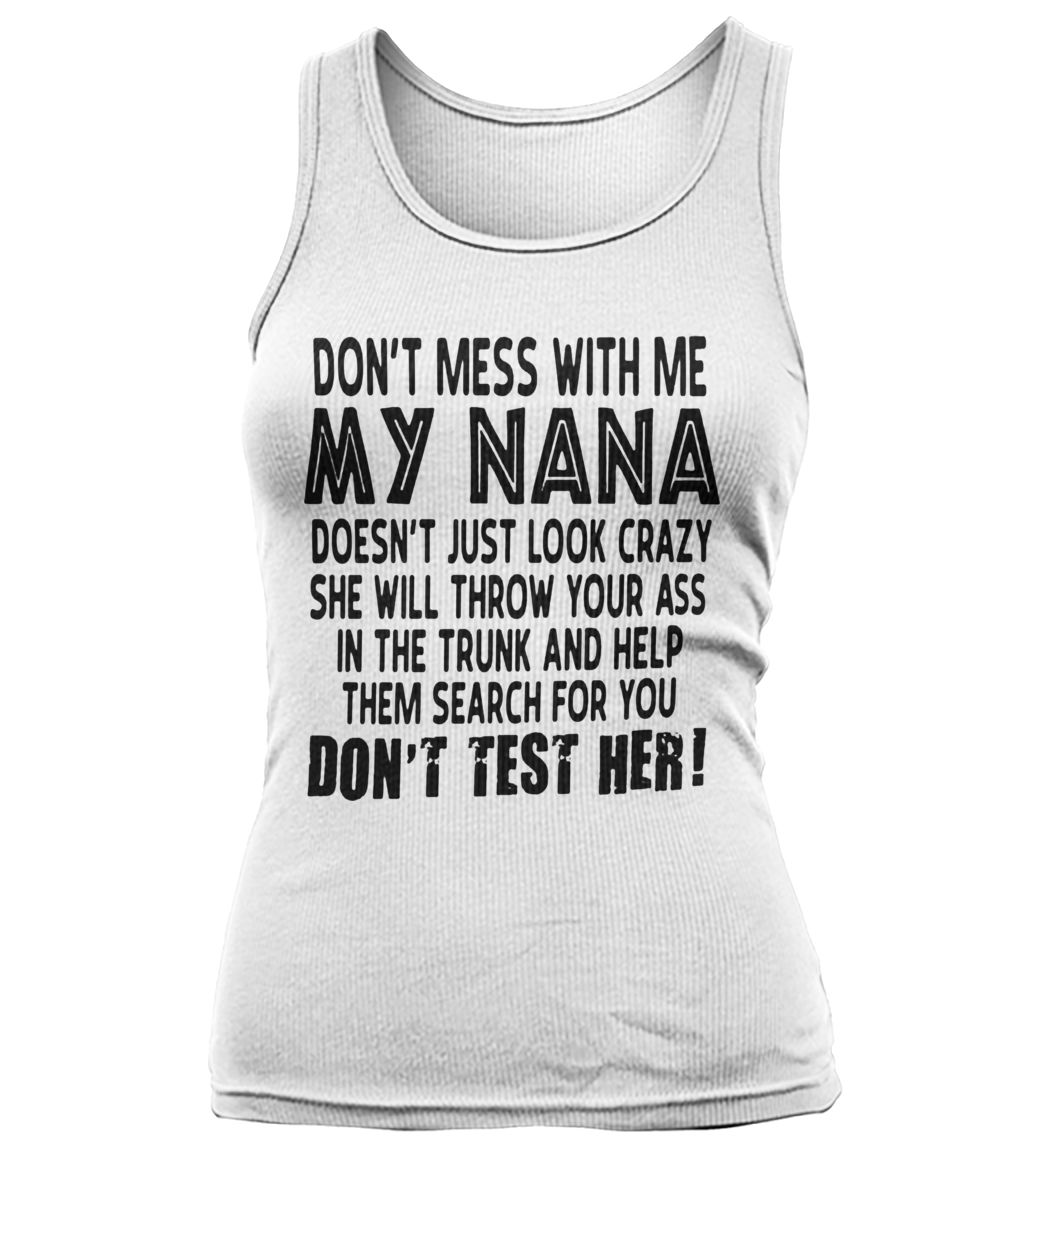 Don't mess with me my nana doesn't just look crazy don't test her women's tank top